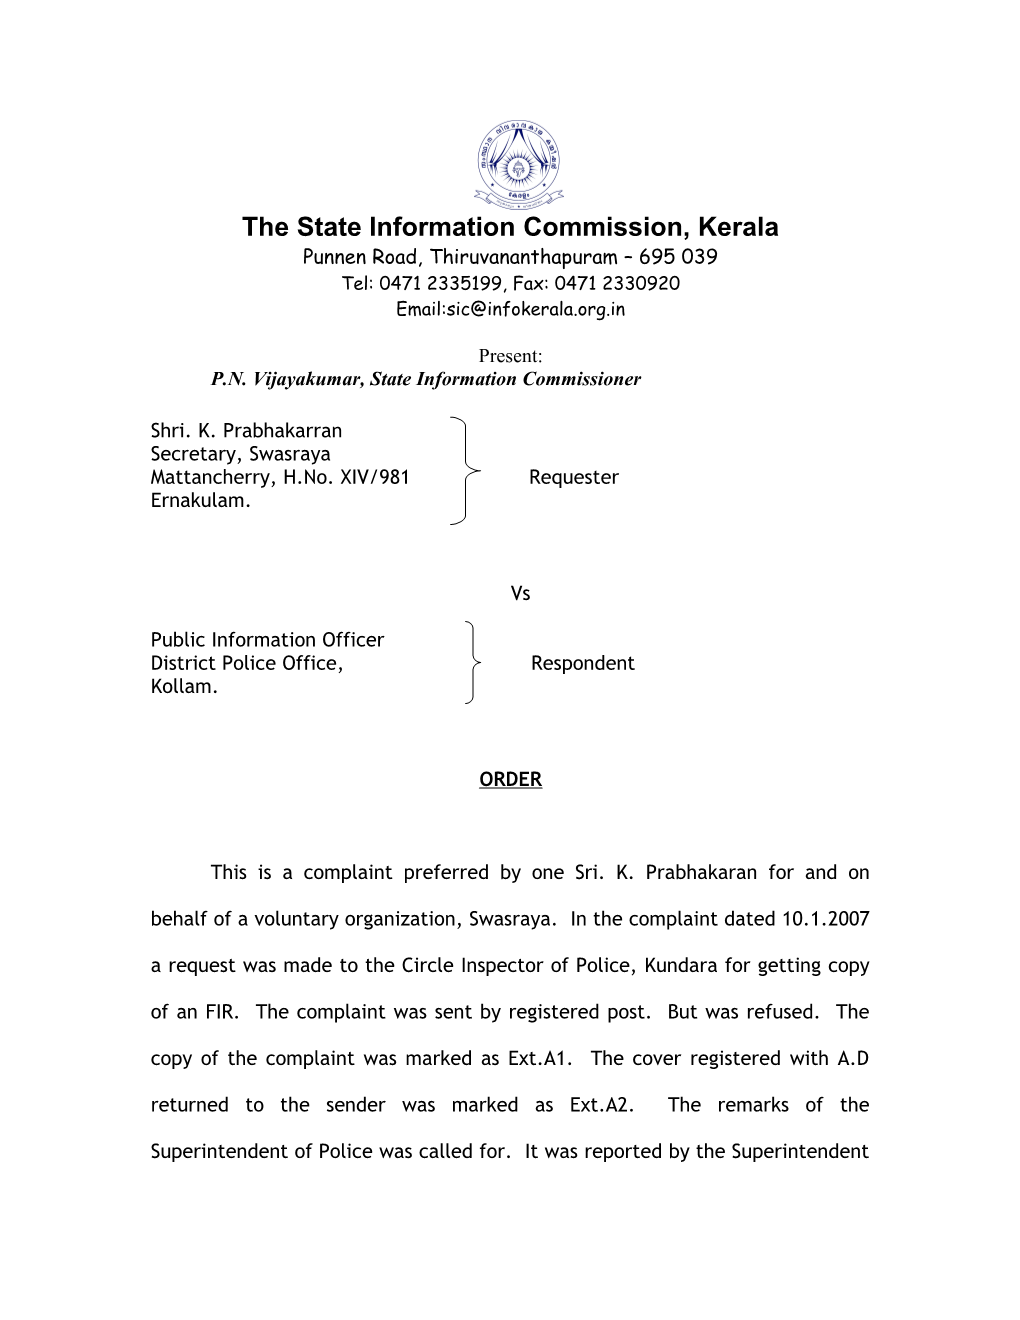 The State Information Commission, Kerala